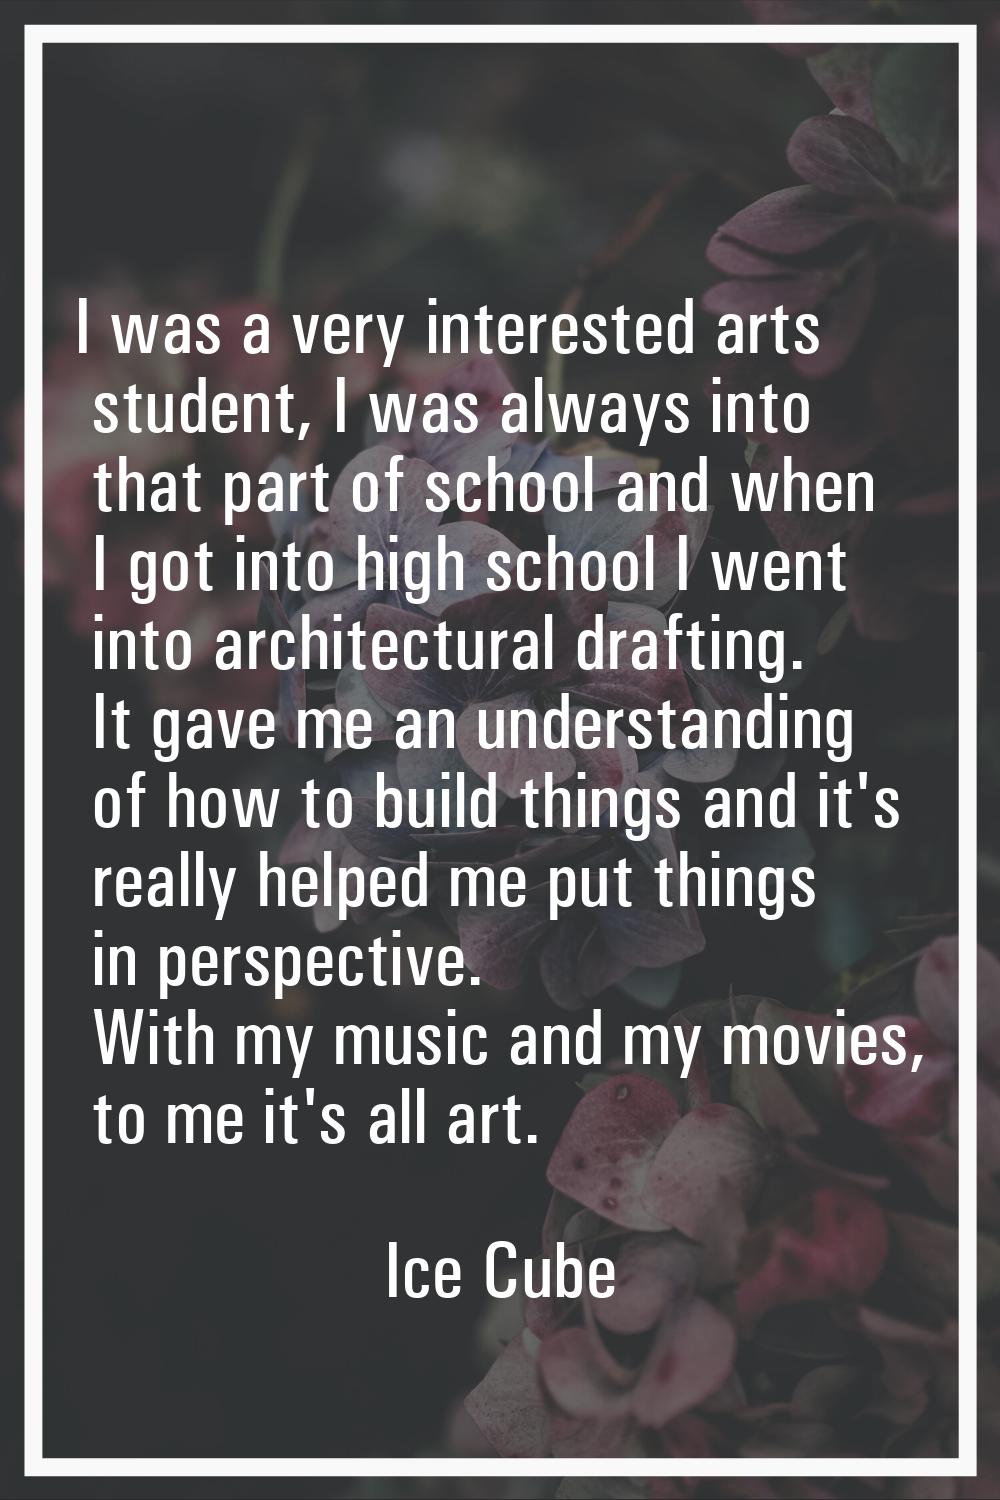 I was a very interested arts student, I was always into that part of school and when I got into hig